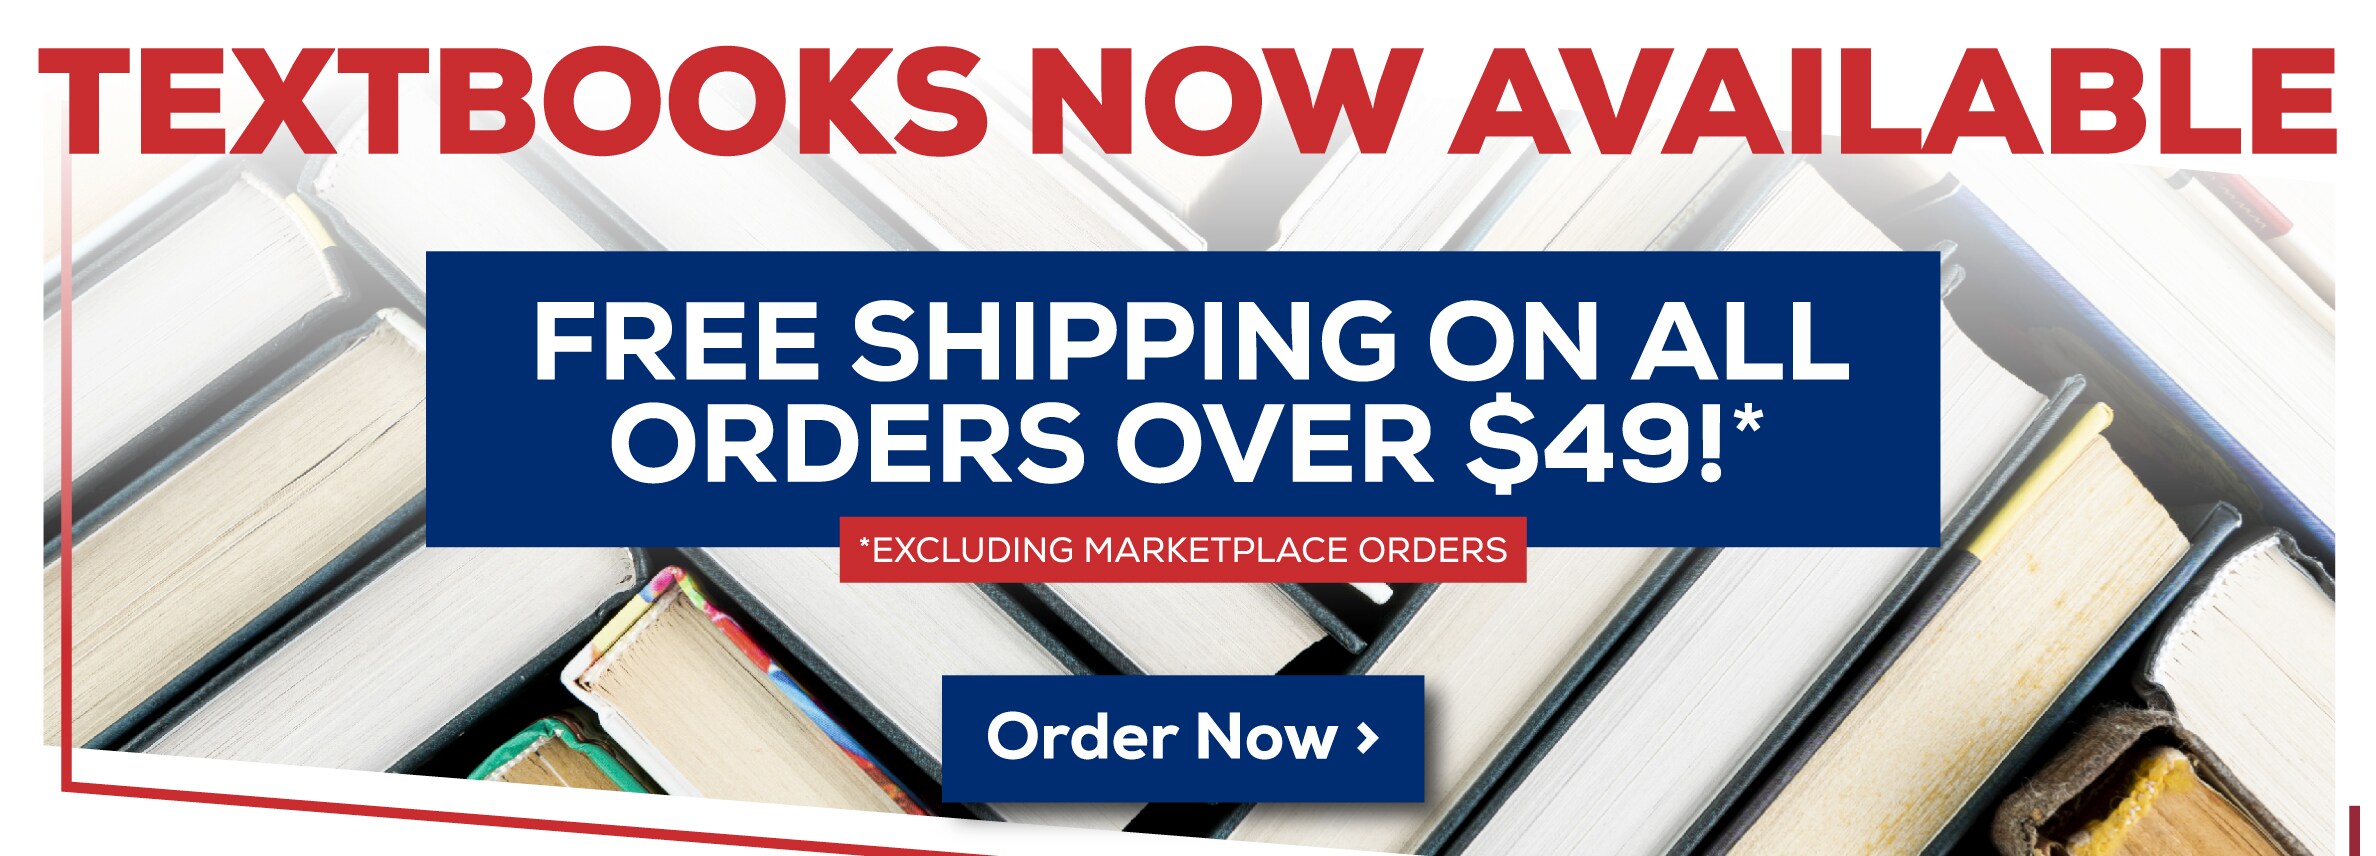 Textbooks Now Available. Free shipping on all orders over $49. Excluding marketplace orders. Order now!						